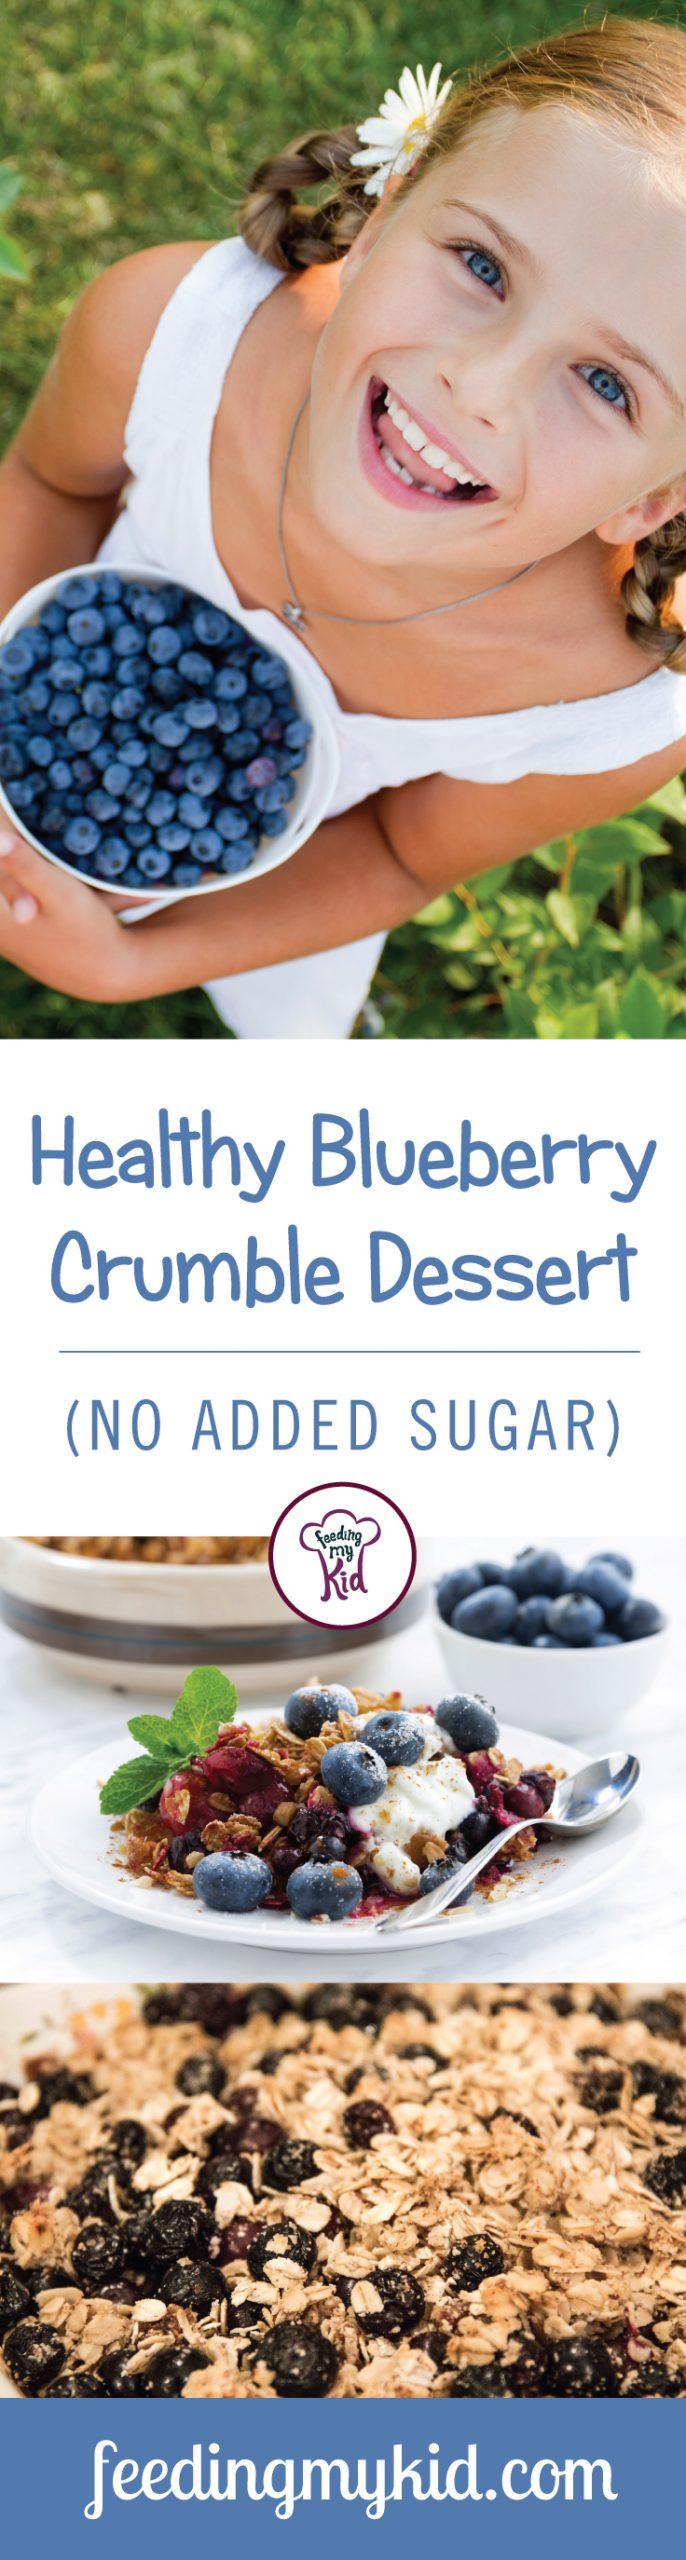 Blueberry Crumble Recipe - Easy Blueberry Desserts